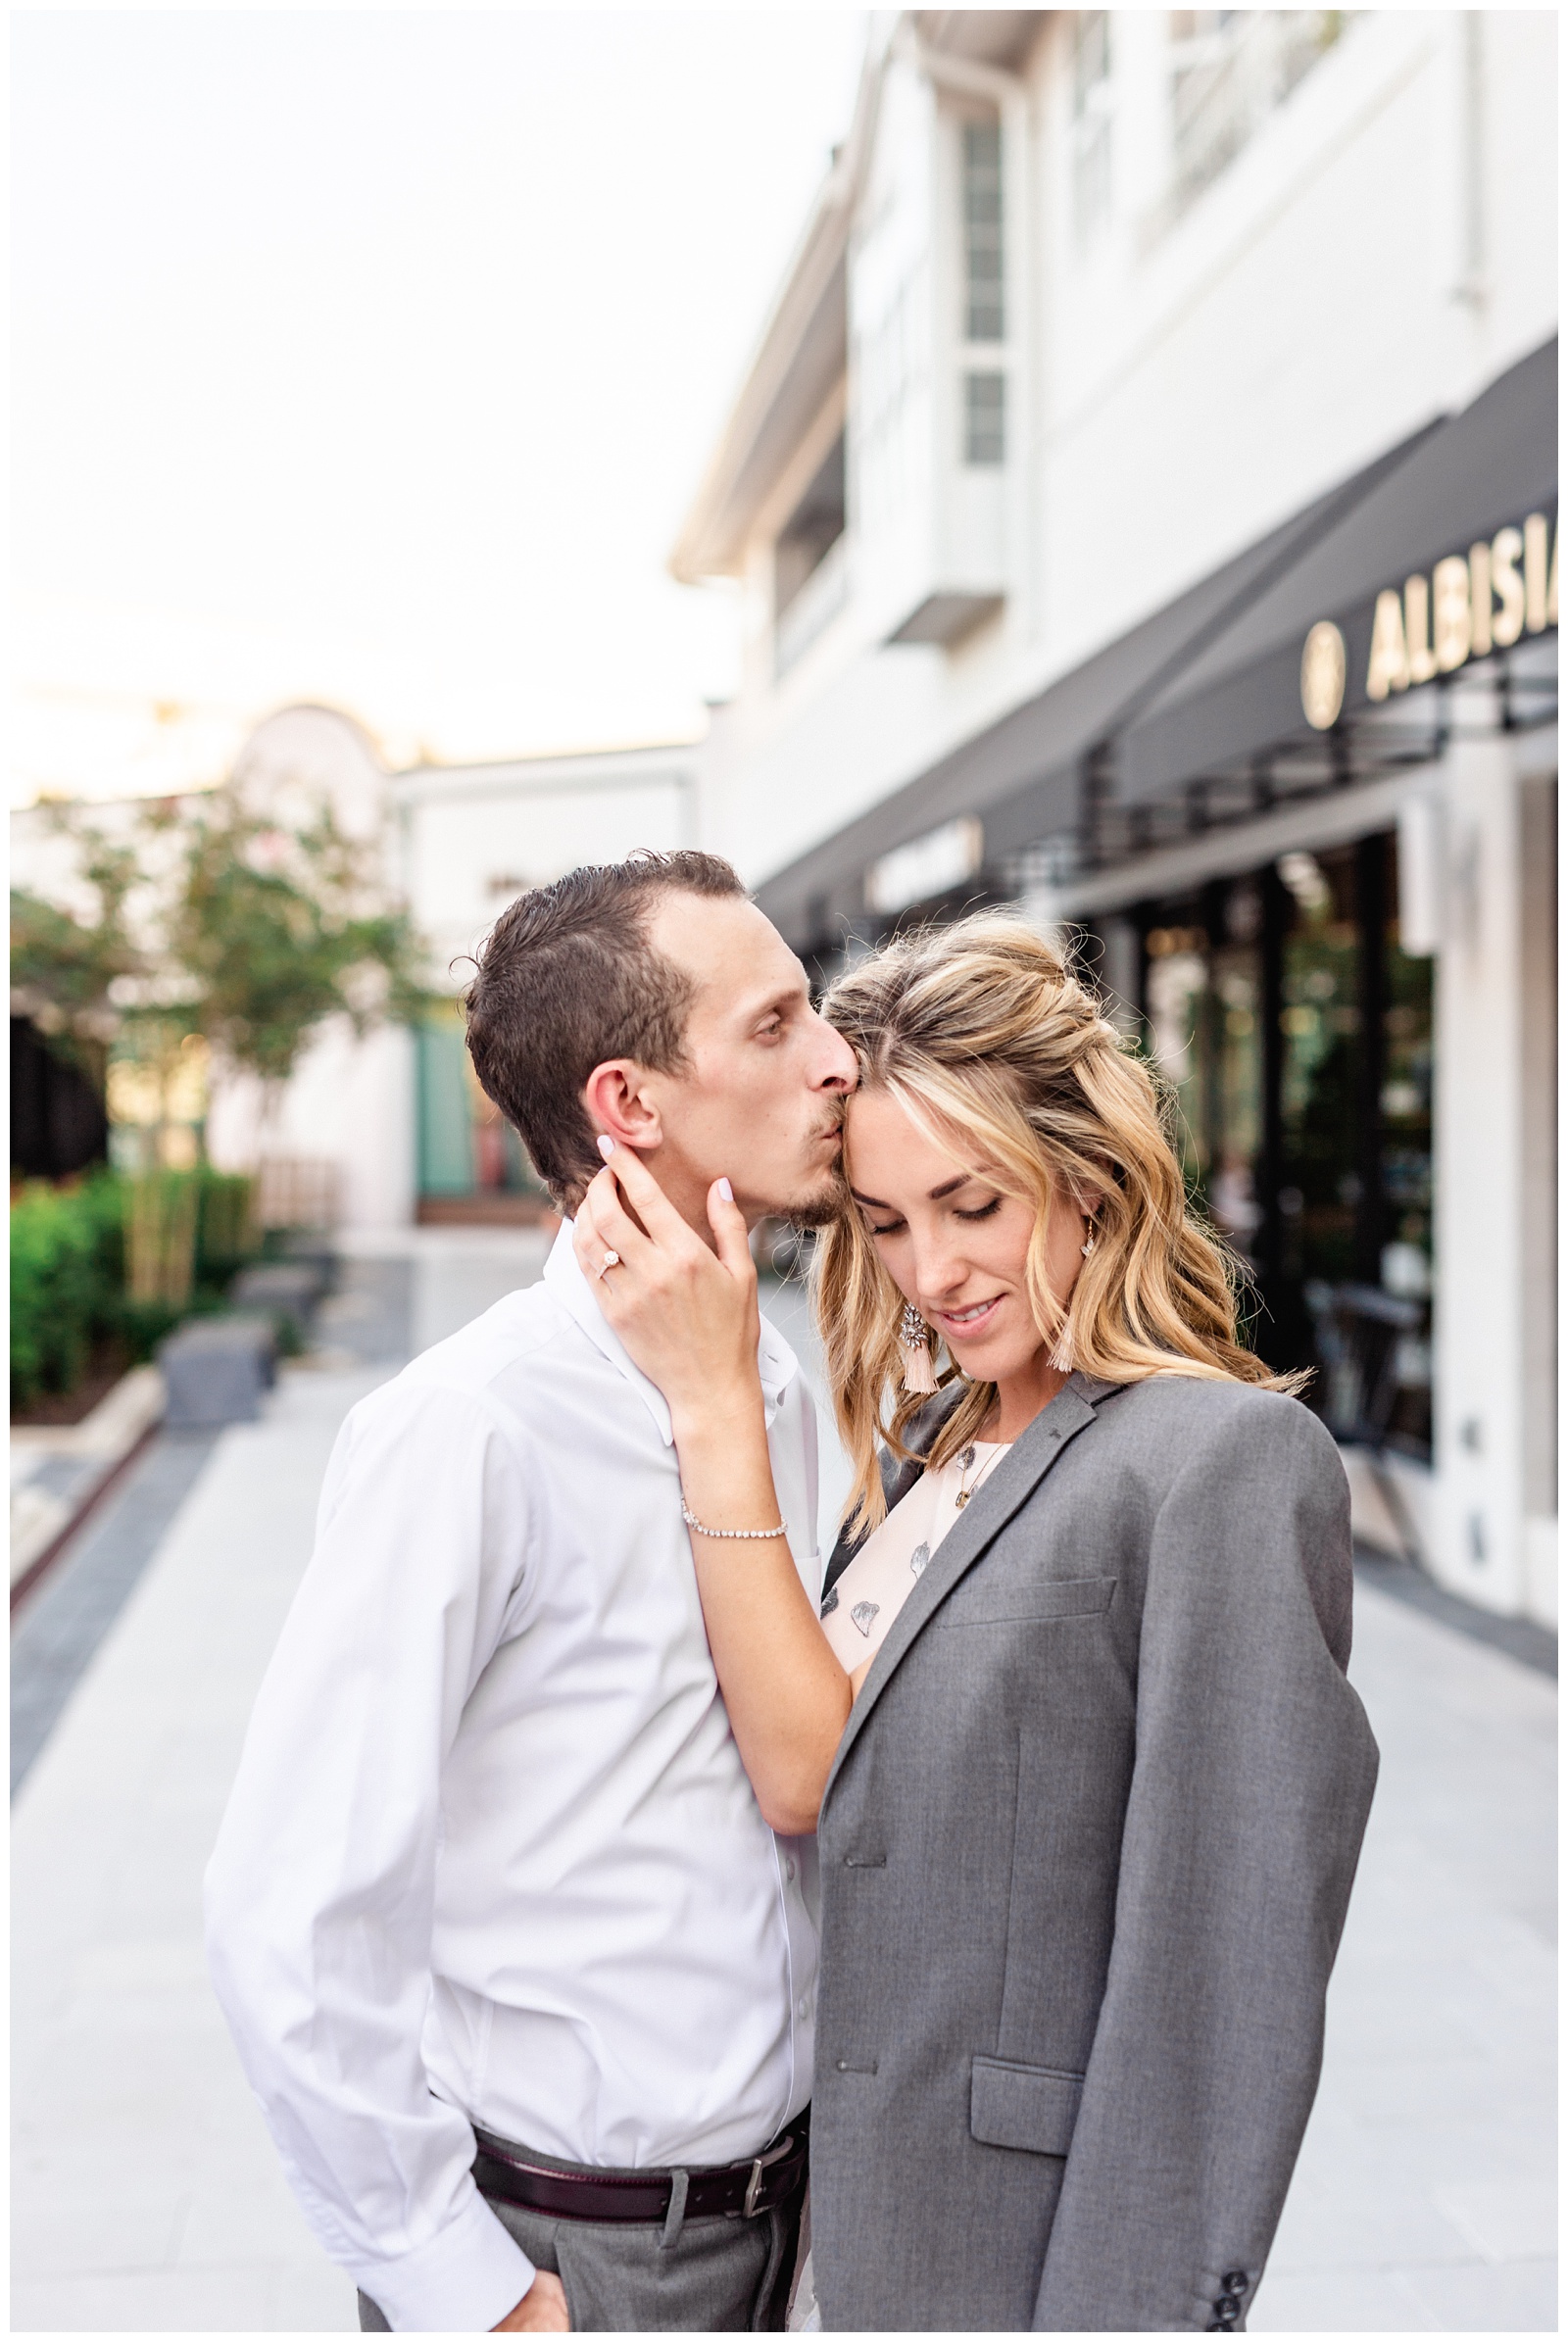 Hyde Park Engagement Session - Matlock and Kelly Photography